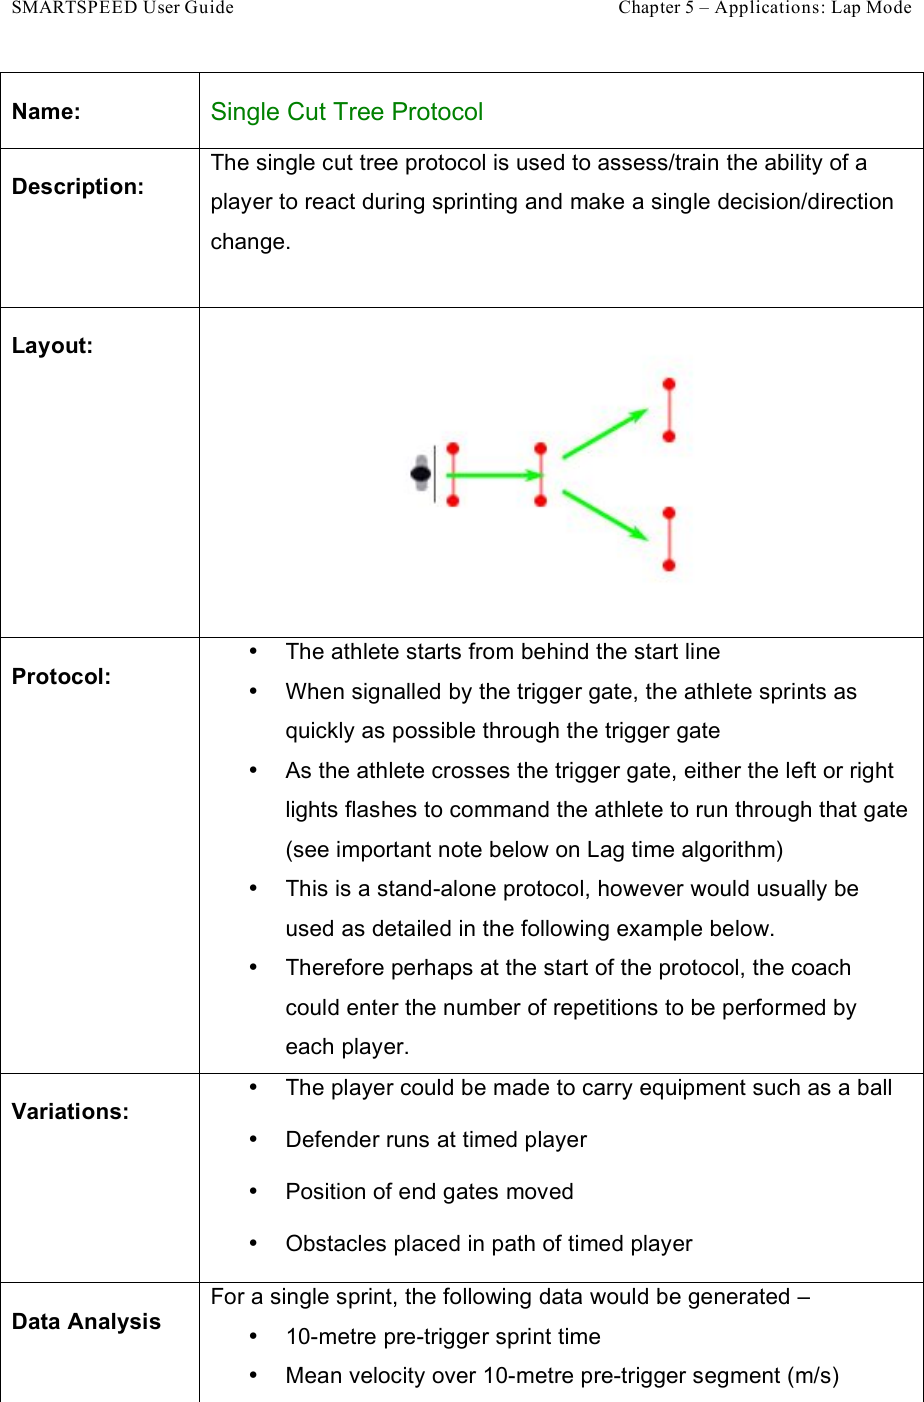 SMARTSPEED User Guide    Chapter 5 – Applications: Lap Mode Name: Single Cut Tree Protocol Description: The single cut tree protocol is used to assess/train the ability of a player to react during sprinting and make a single decision/direction change.   Layout:  Protocol: •  The athlete starts from behind the start line •  When signalled by the trigger gate, the athlete sprints as quickly as possible through the trigger gate •  As the athlete crosses the trigger gate, either the left or right lights flashes to command the athlete to run through that gate (see important note below on Lag time algorithm) •  This is a stand-alone protocol, however would usually be used as detailed in the following example below. •  Therefore perhaps at the start of the protocol, the coach could enter the number of repetitions to be performed by each player. Variations: •  The player could be made to carry equipment such as a ball •  Defender runs at timed player •  Position of end gates moved •  Obstacles placed in path of timed player Data Analysis For a single sprint, the following data would be generated –  •  10-metre pre-trigger sprint time •  Mean velocity over 10-metre pre-trigger segment (m/s) 